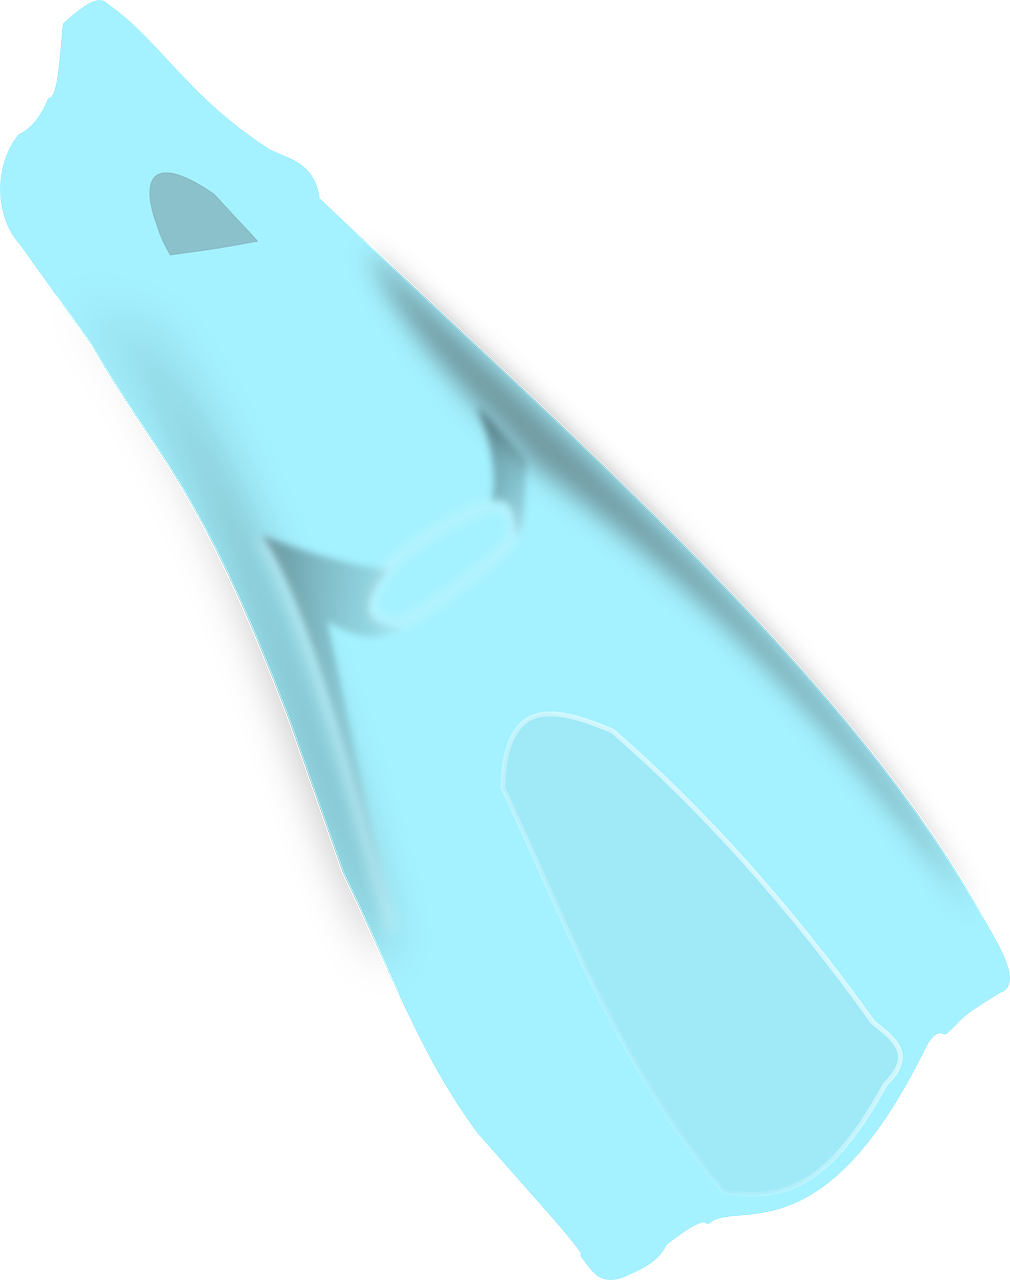 Blue Diving Fin Underwater.png